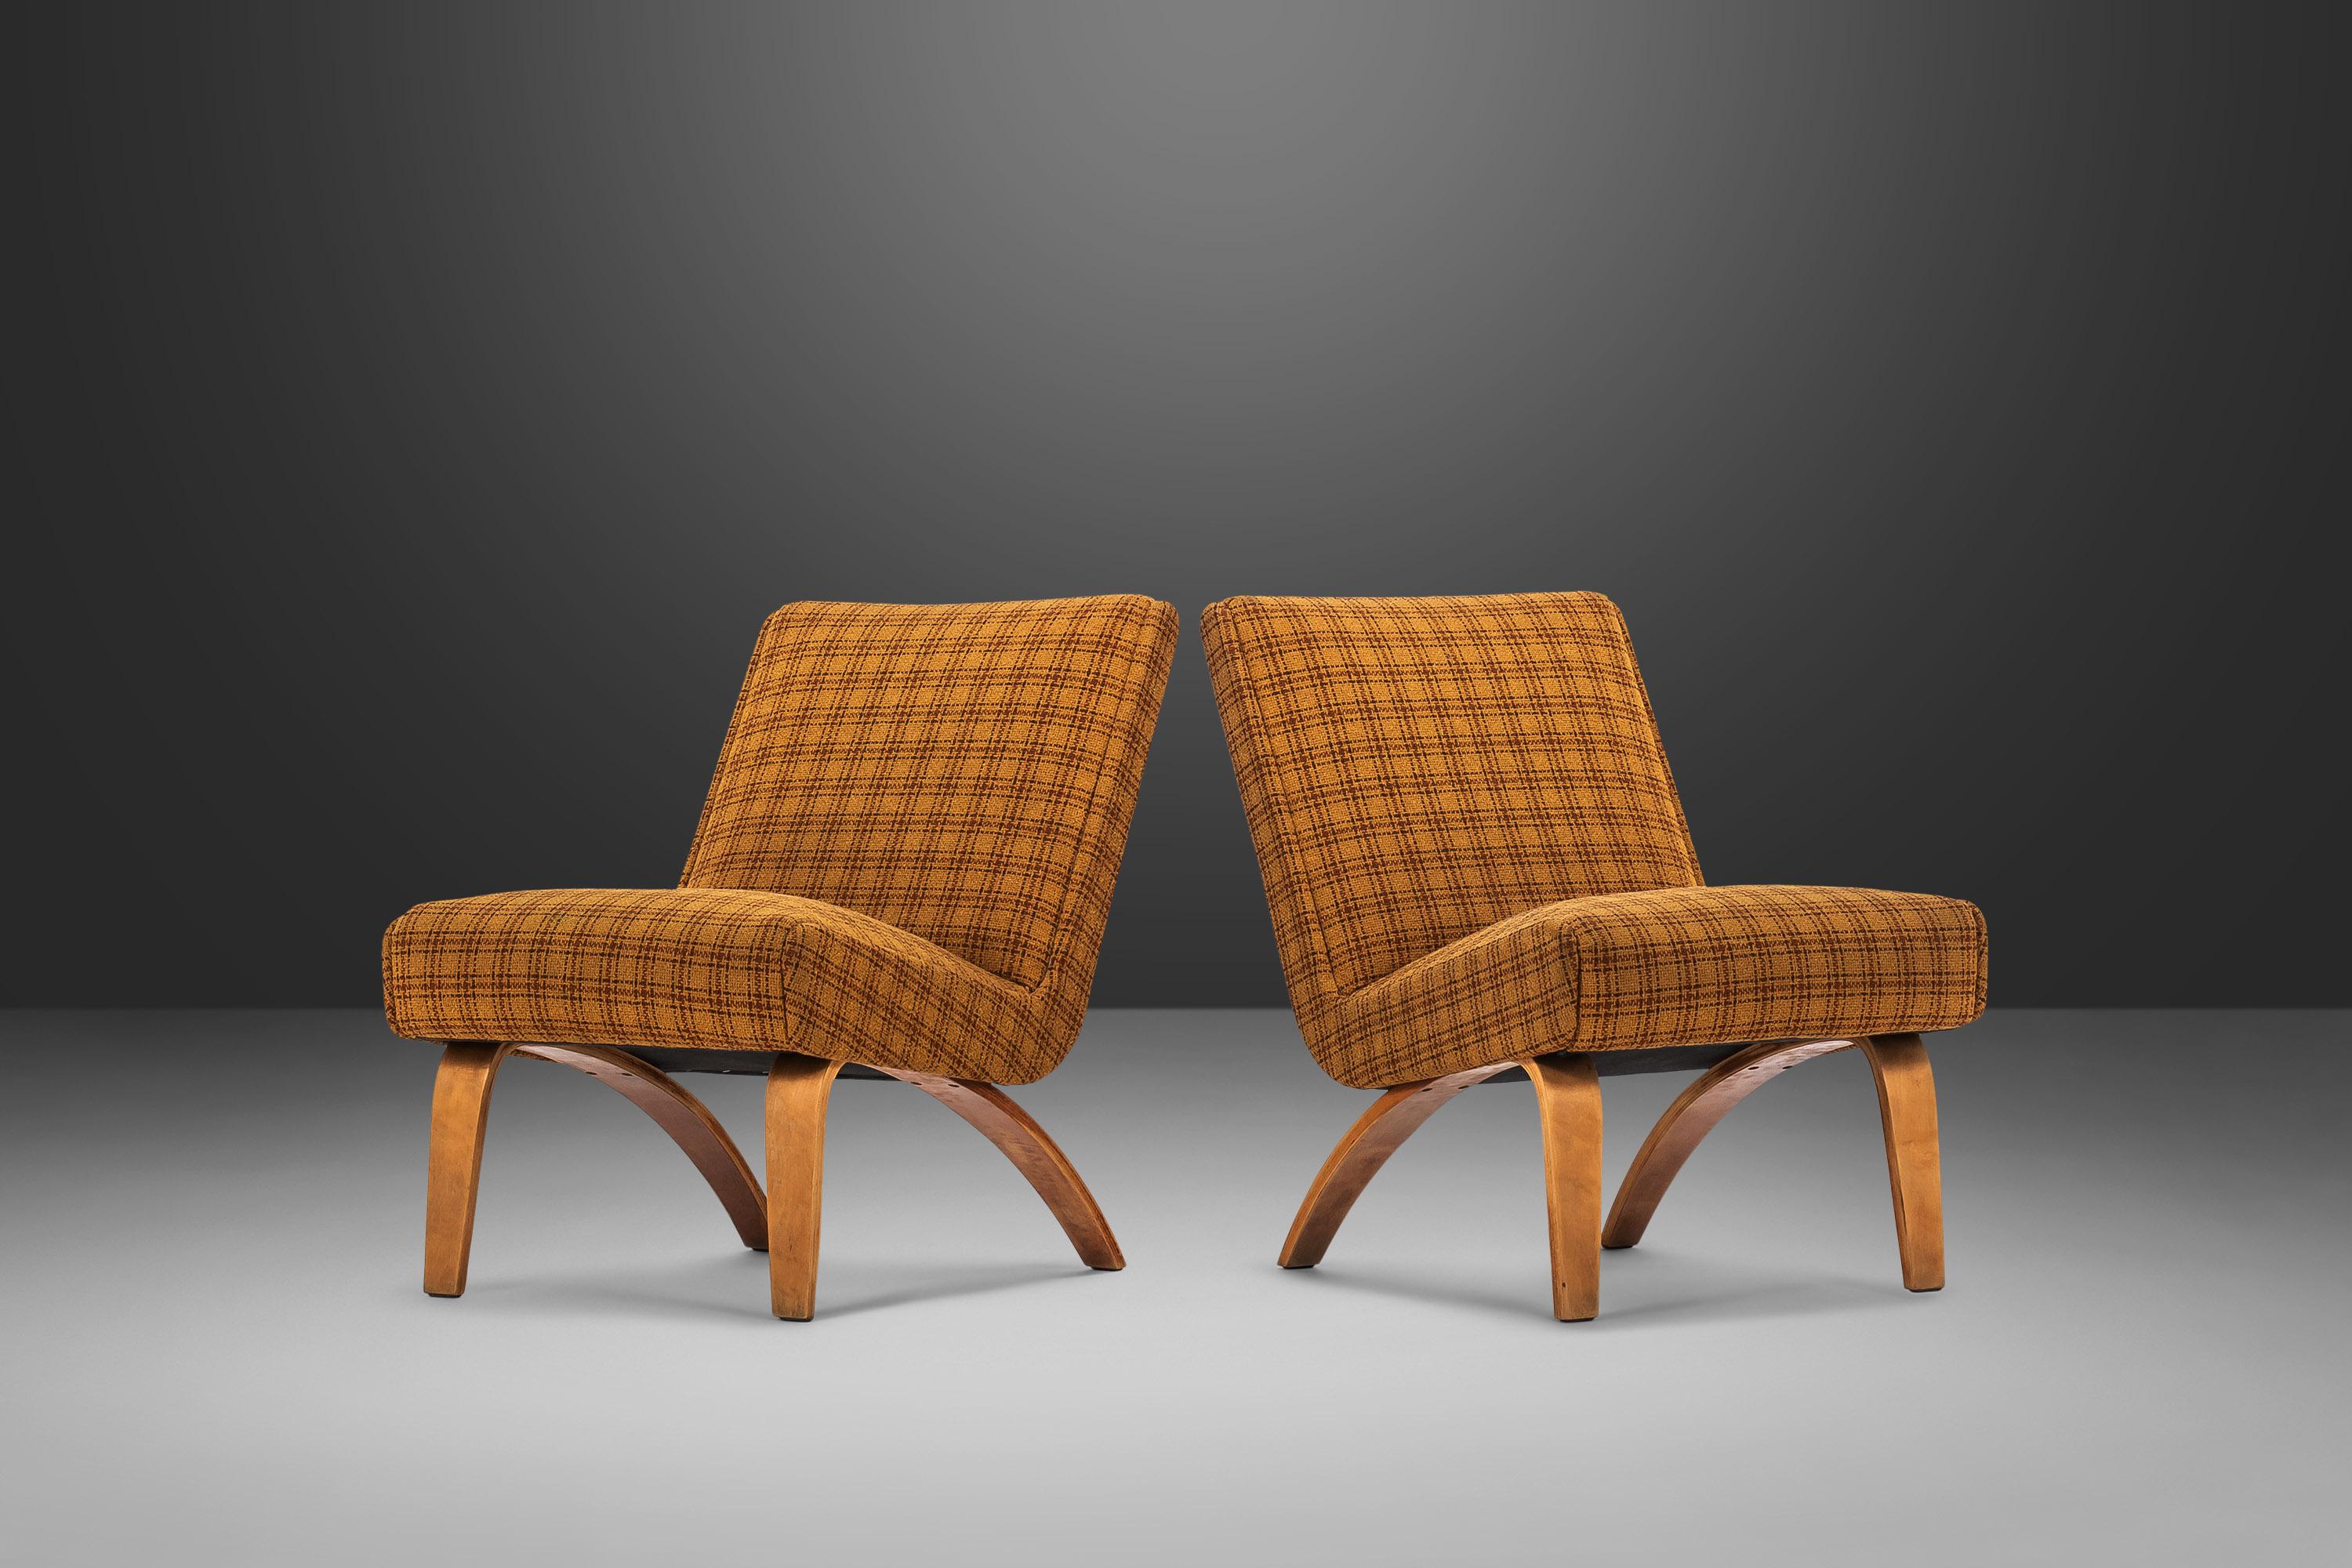 Comfort. Vintage fabric. Captivating bentwood legs. These two slipper chairs are the perfect addition to any space needing a pop of color and/or a minimal footprint. The original yellow plaid upholstery gives these splendid chairs tons of character